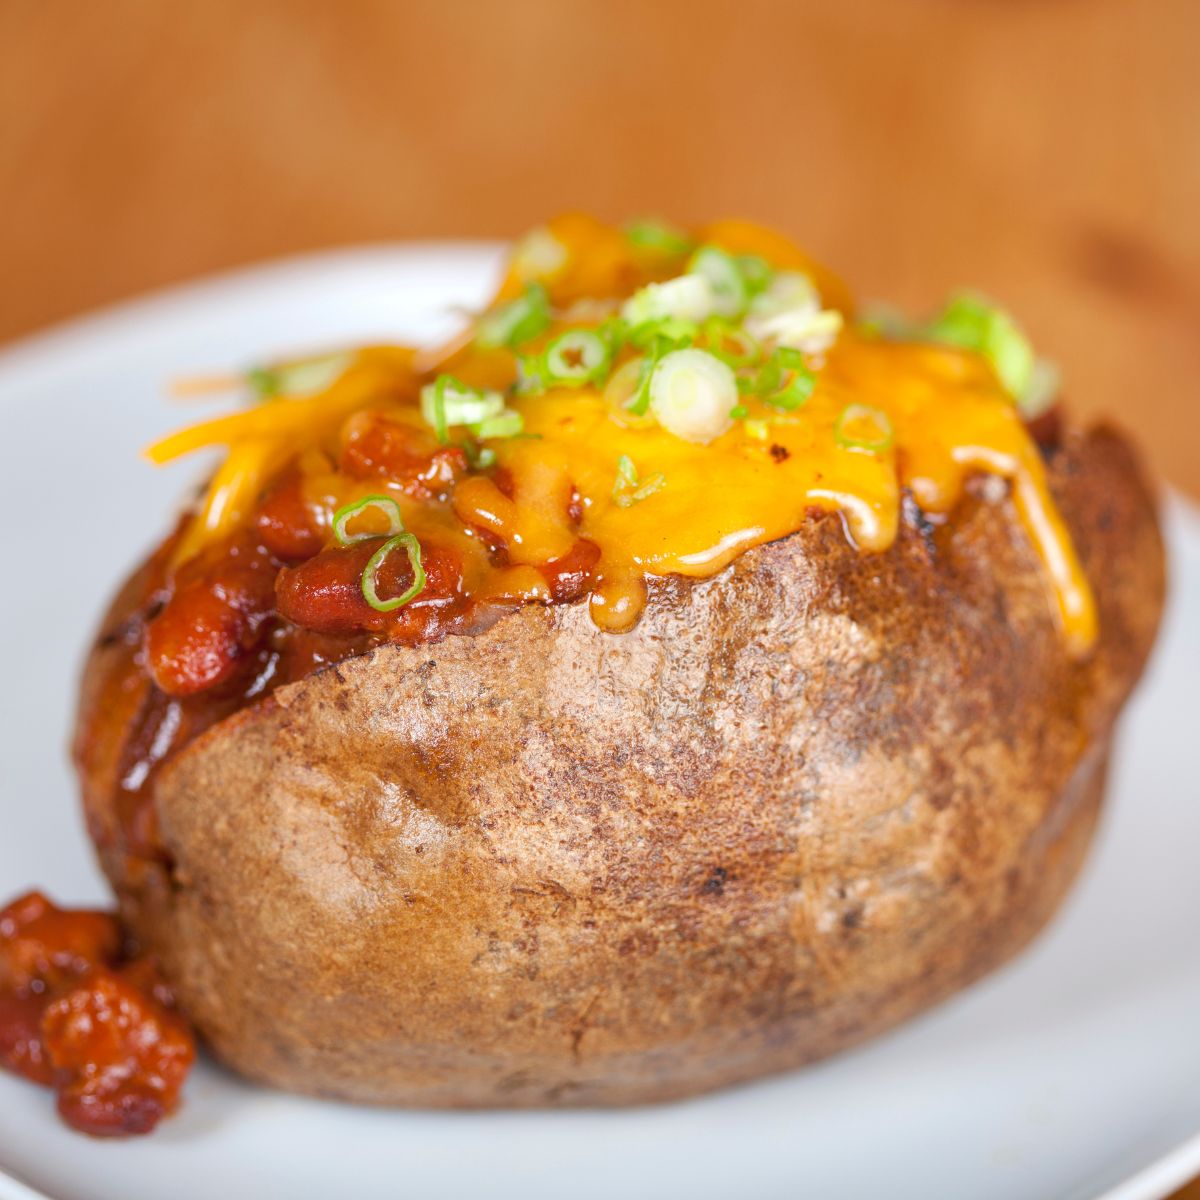 Baked potato with chili and cheese